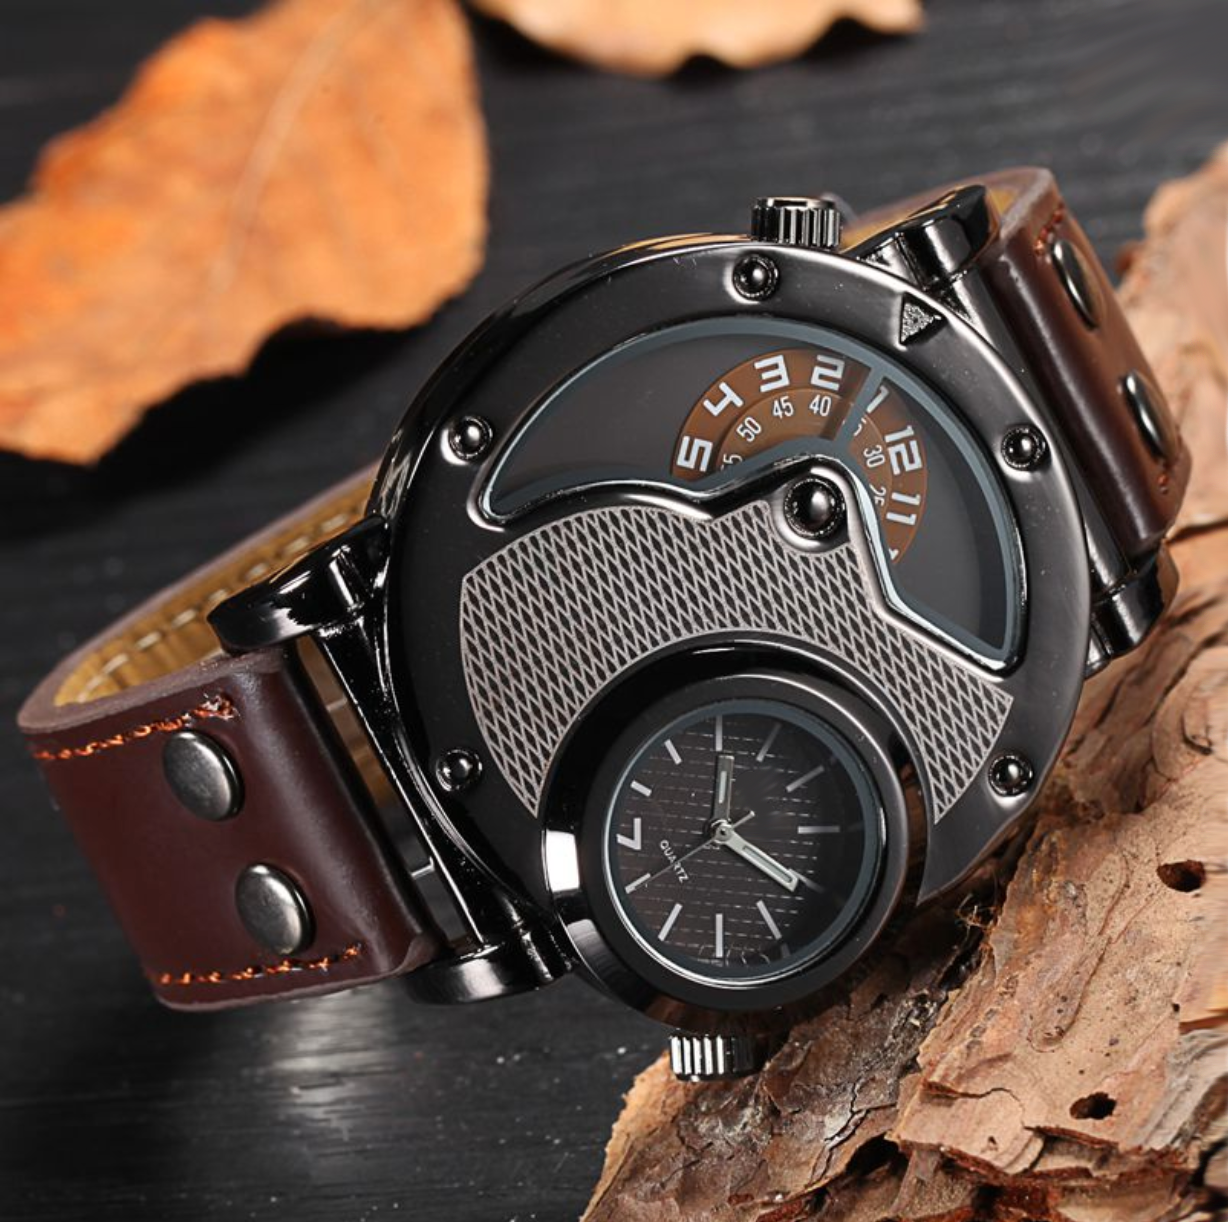 Trillani Mens Watch - Leather Vintage Inspired Timepiece - Military Watches For Men - Perfect Dad Gifts Or Gift For Men